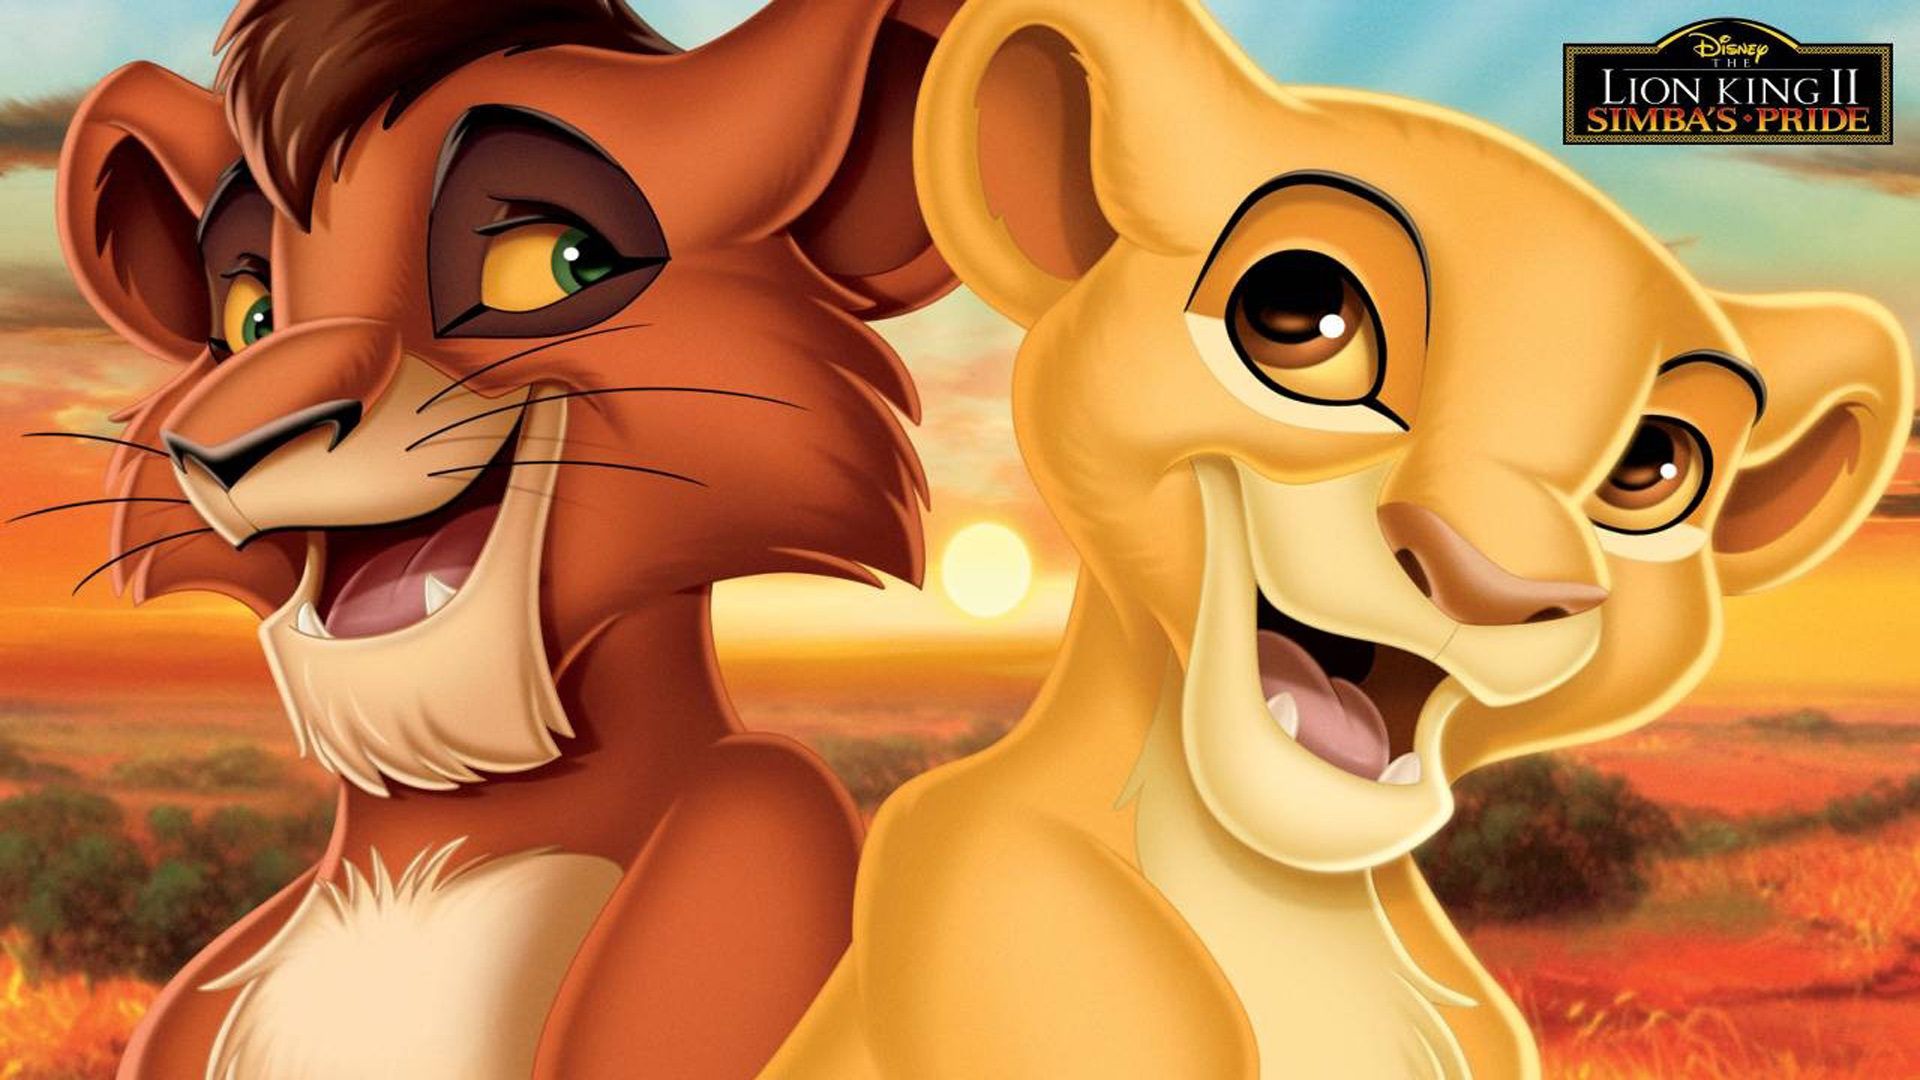 The Lion King 2 Simbas Pride Wallpapers Wallpaper Cave - The Lion King